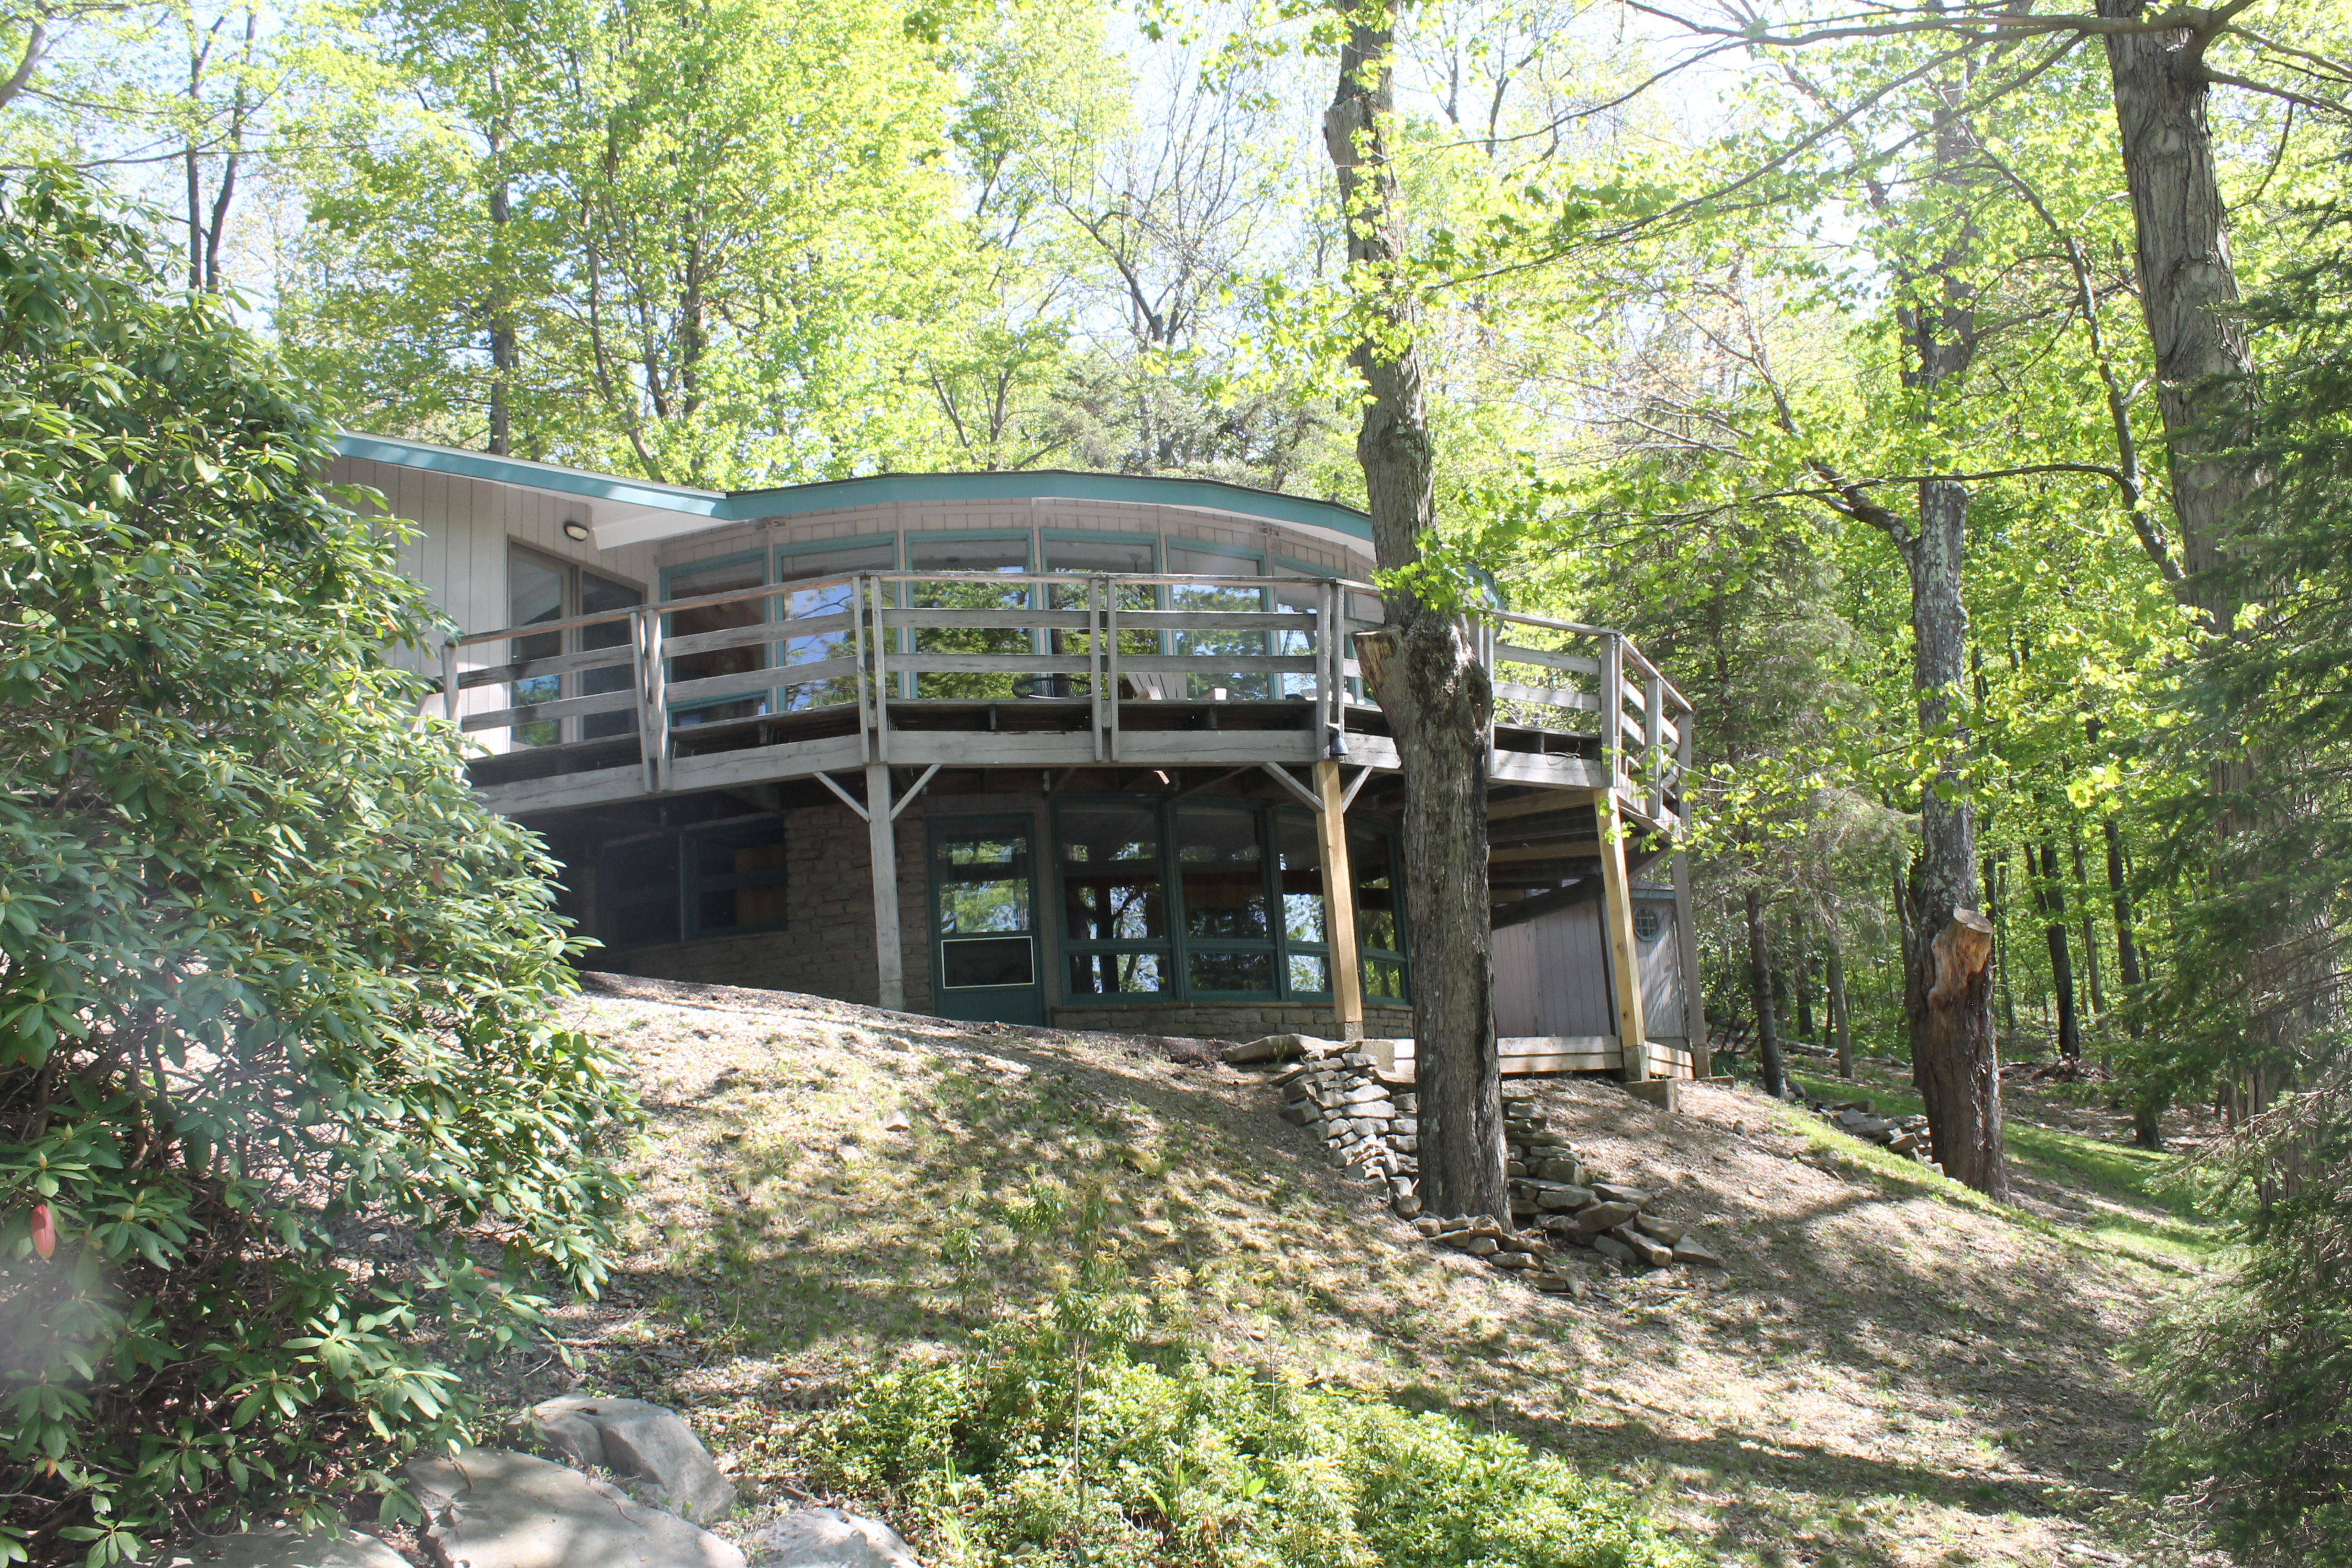 North Gate Chalet, 2498 County Line Rd, Champion, PA 15622